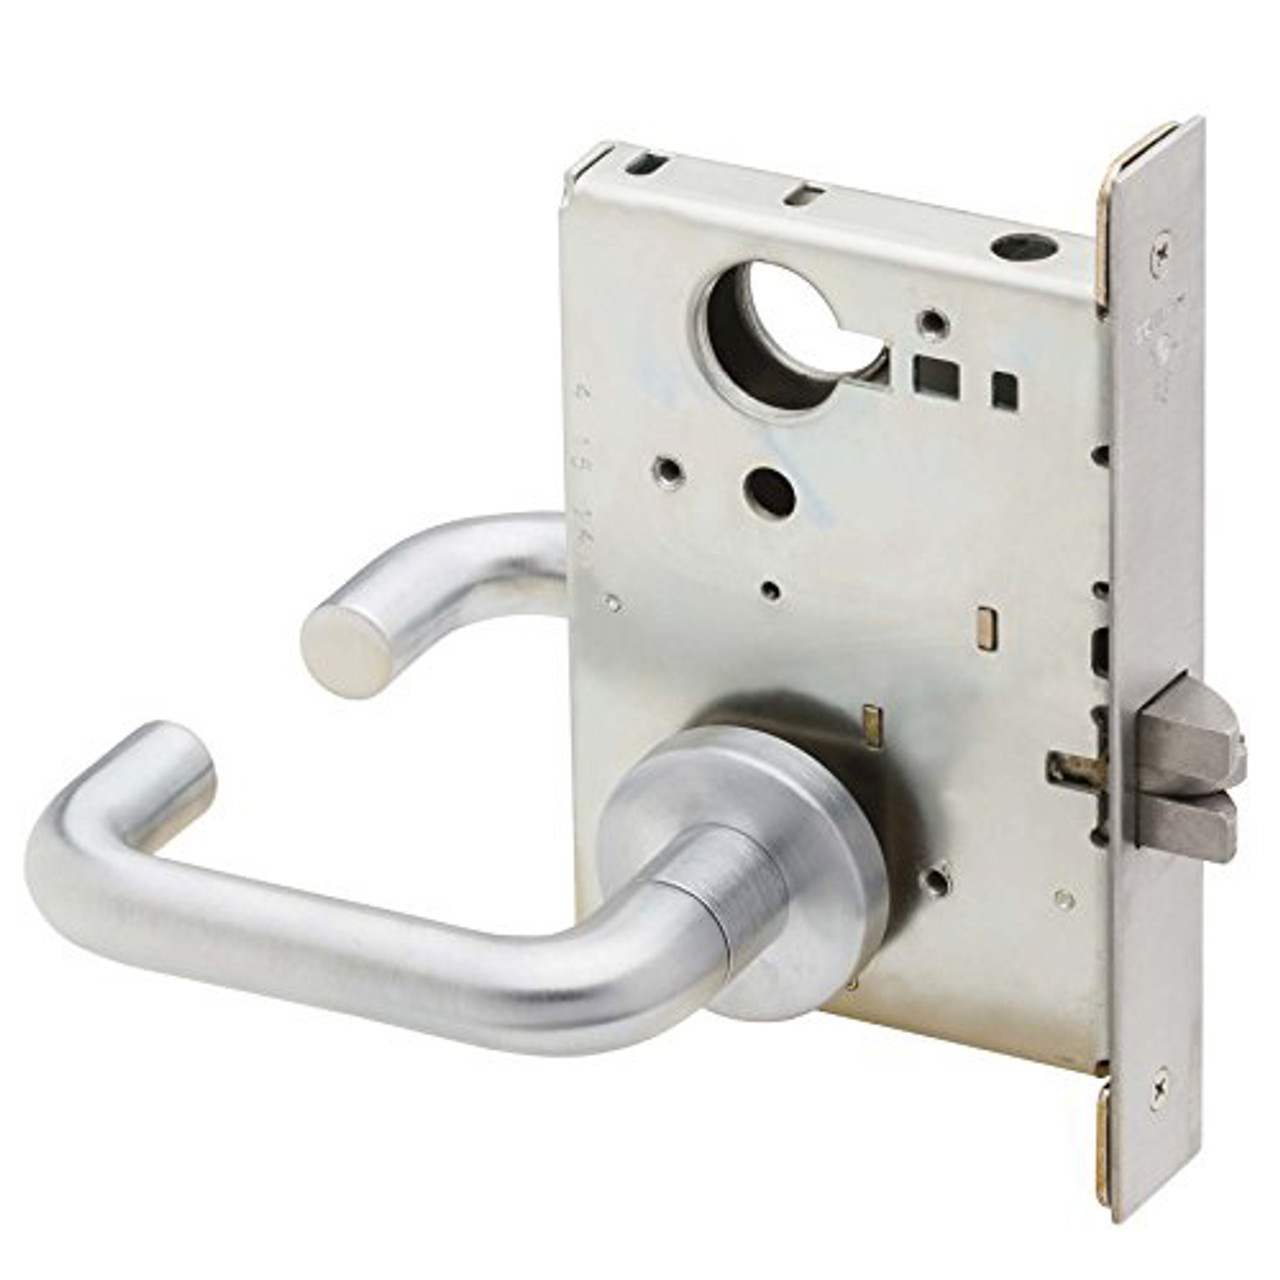 L9010-03B-612 Schlage L Series Passage Latch Commercial Mortise Lock with 03 Cast Lever Design in Satin Bronze